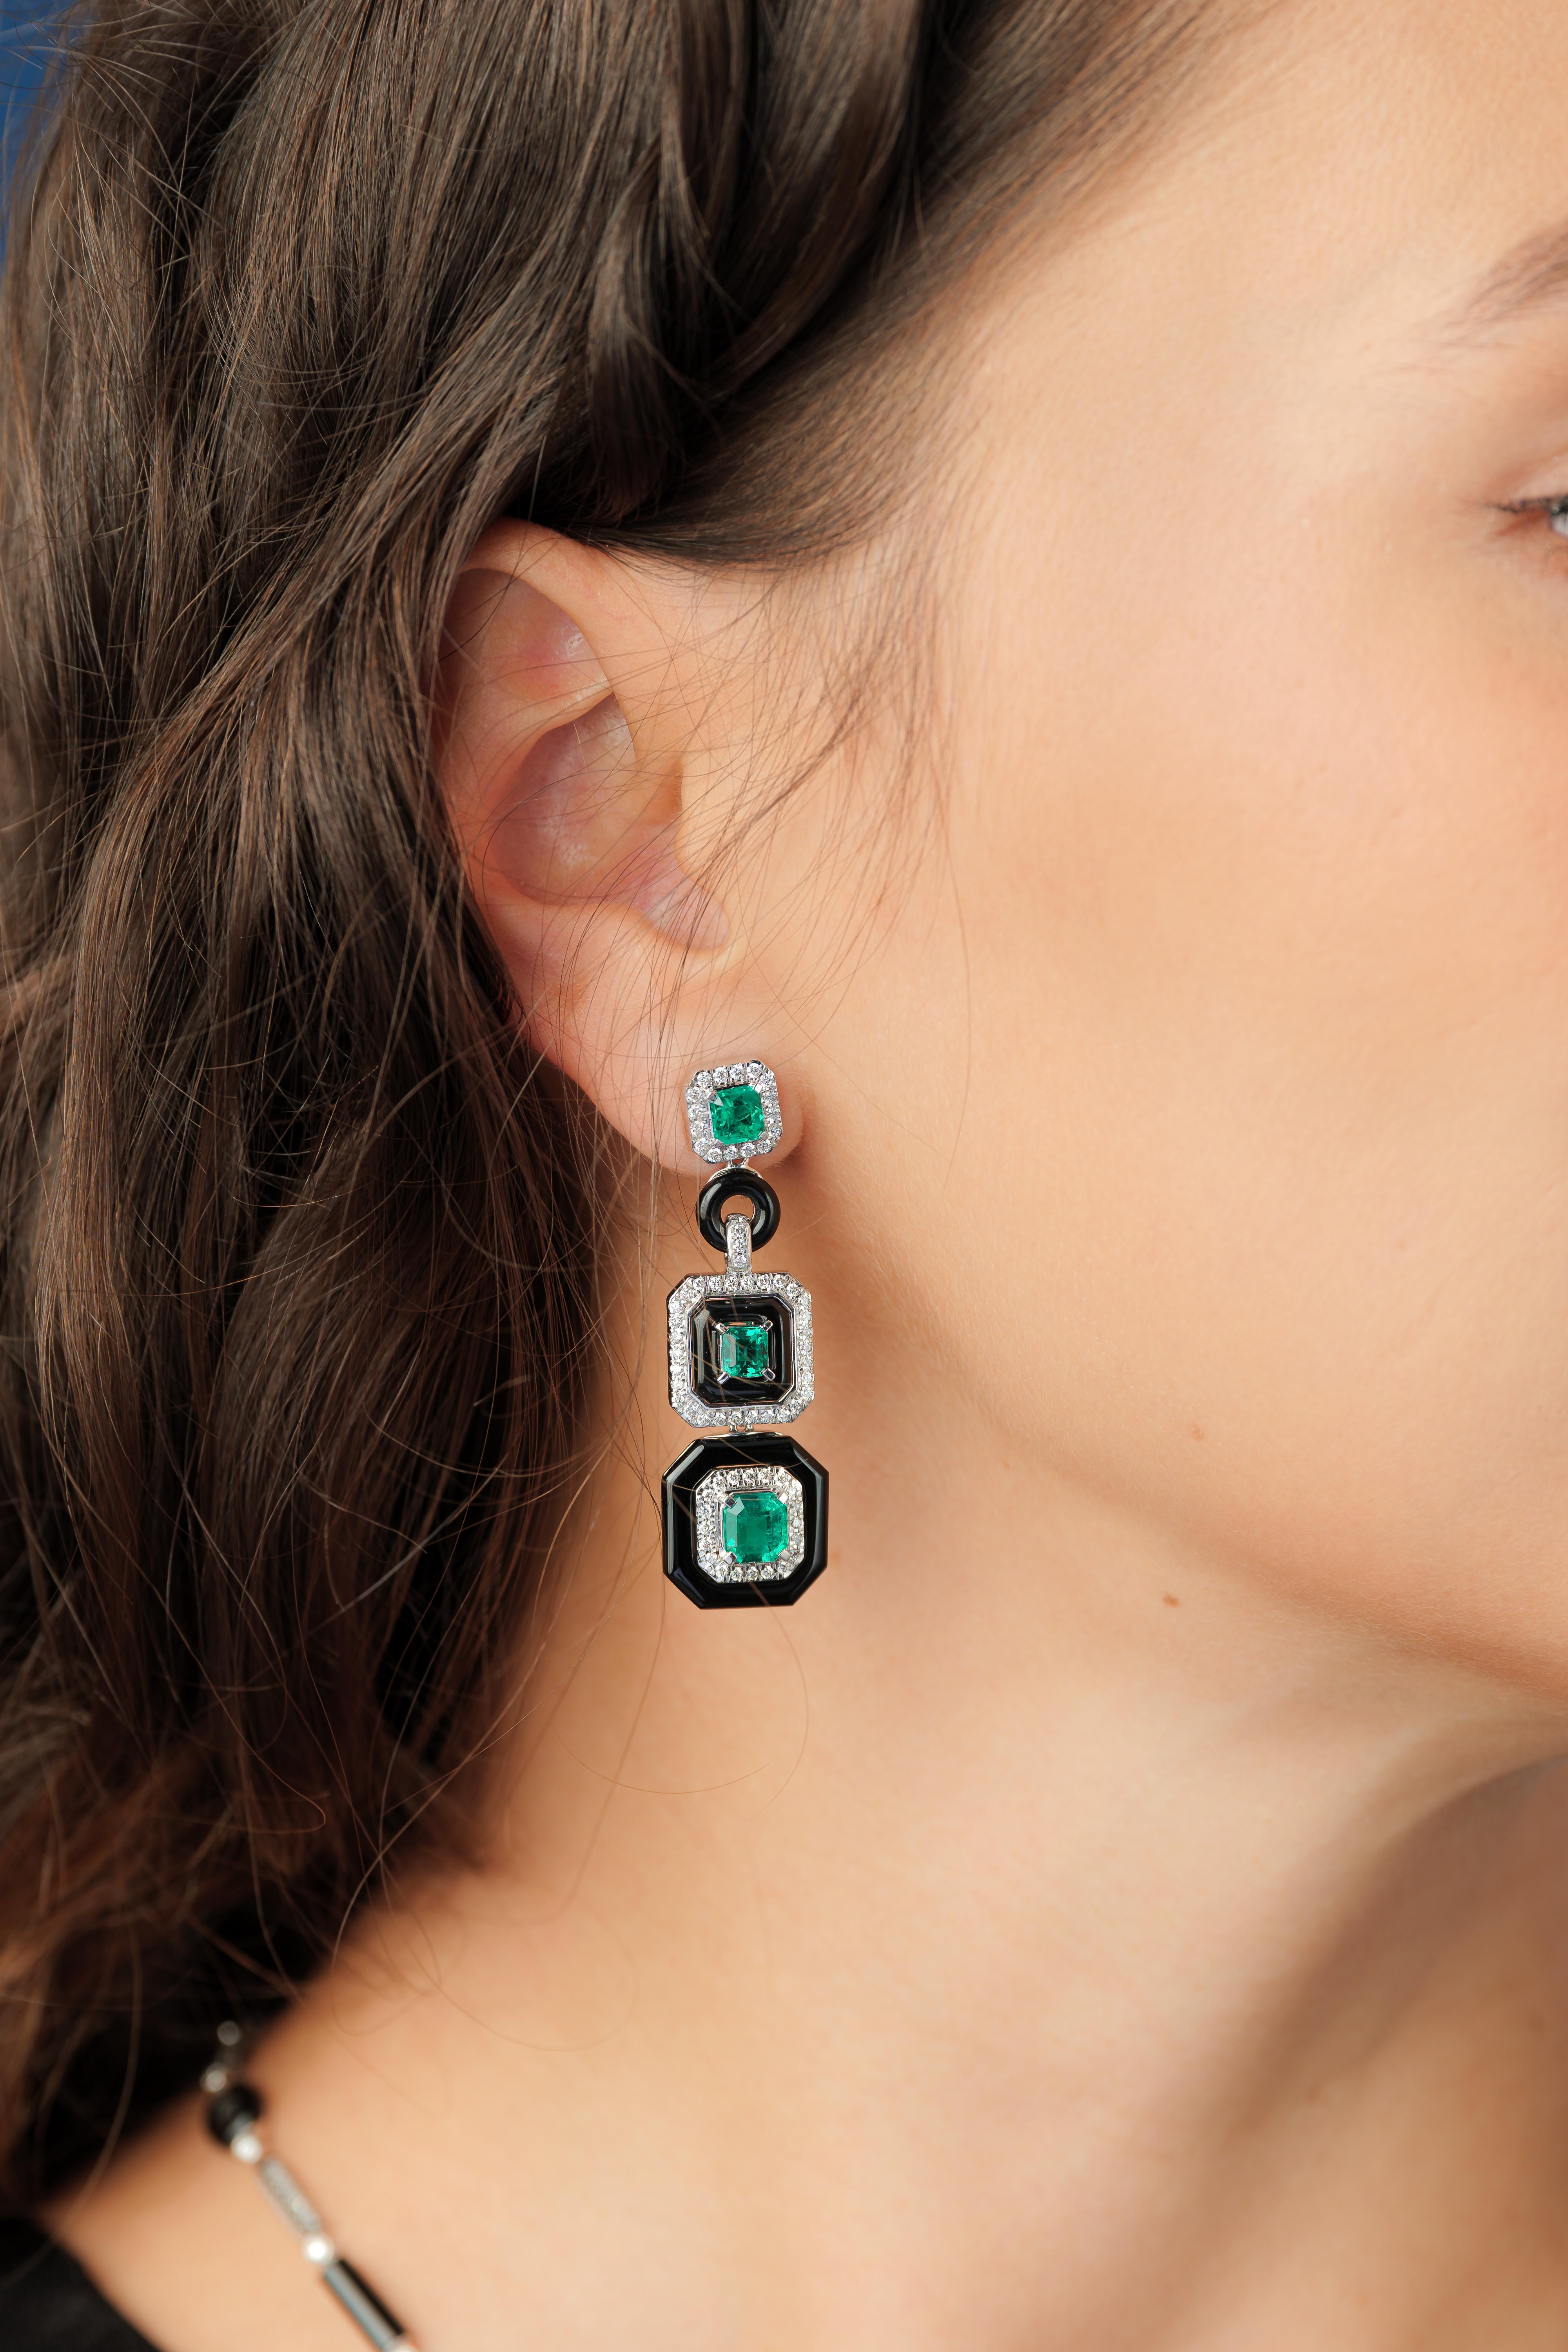 Frame earrings from our Emerald Art Deco Style Collection. These earrings are beautifully constructed with layers of diamonds and black onyx to elevate the stunning Colombian Emeralds.

Designer emerald earrings in 18K white gold and yellow gold